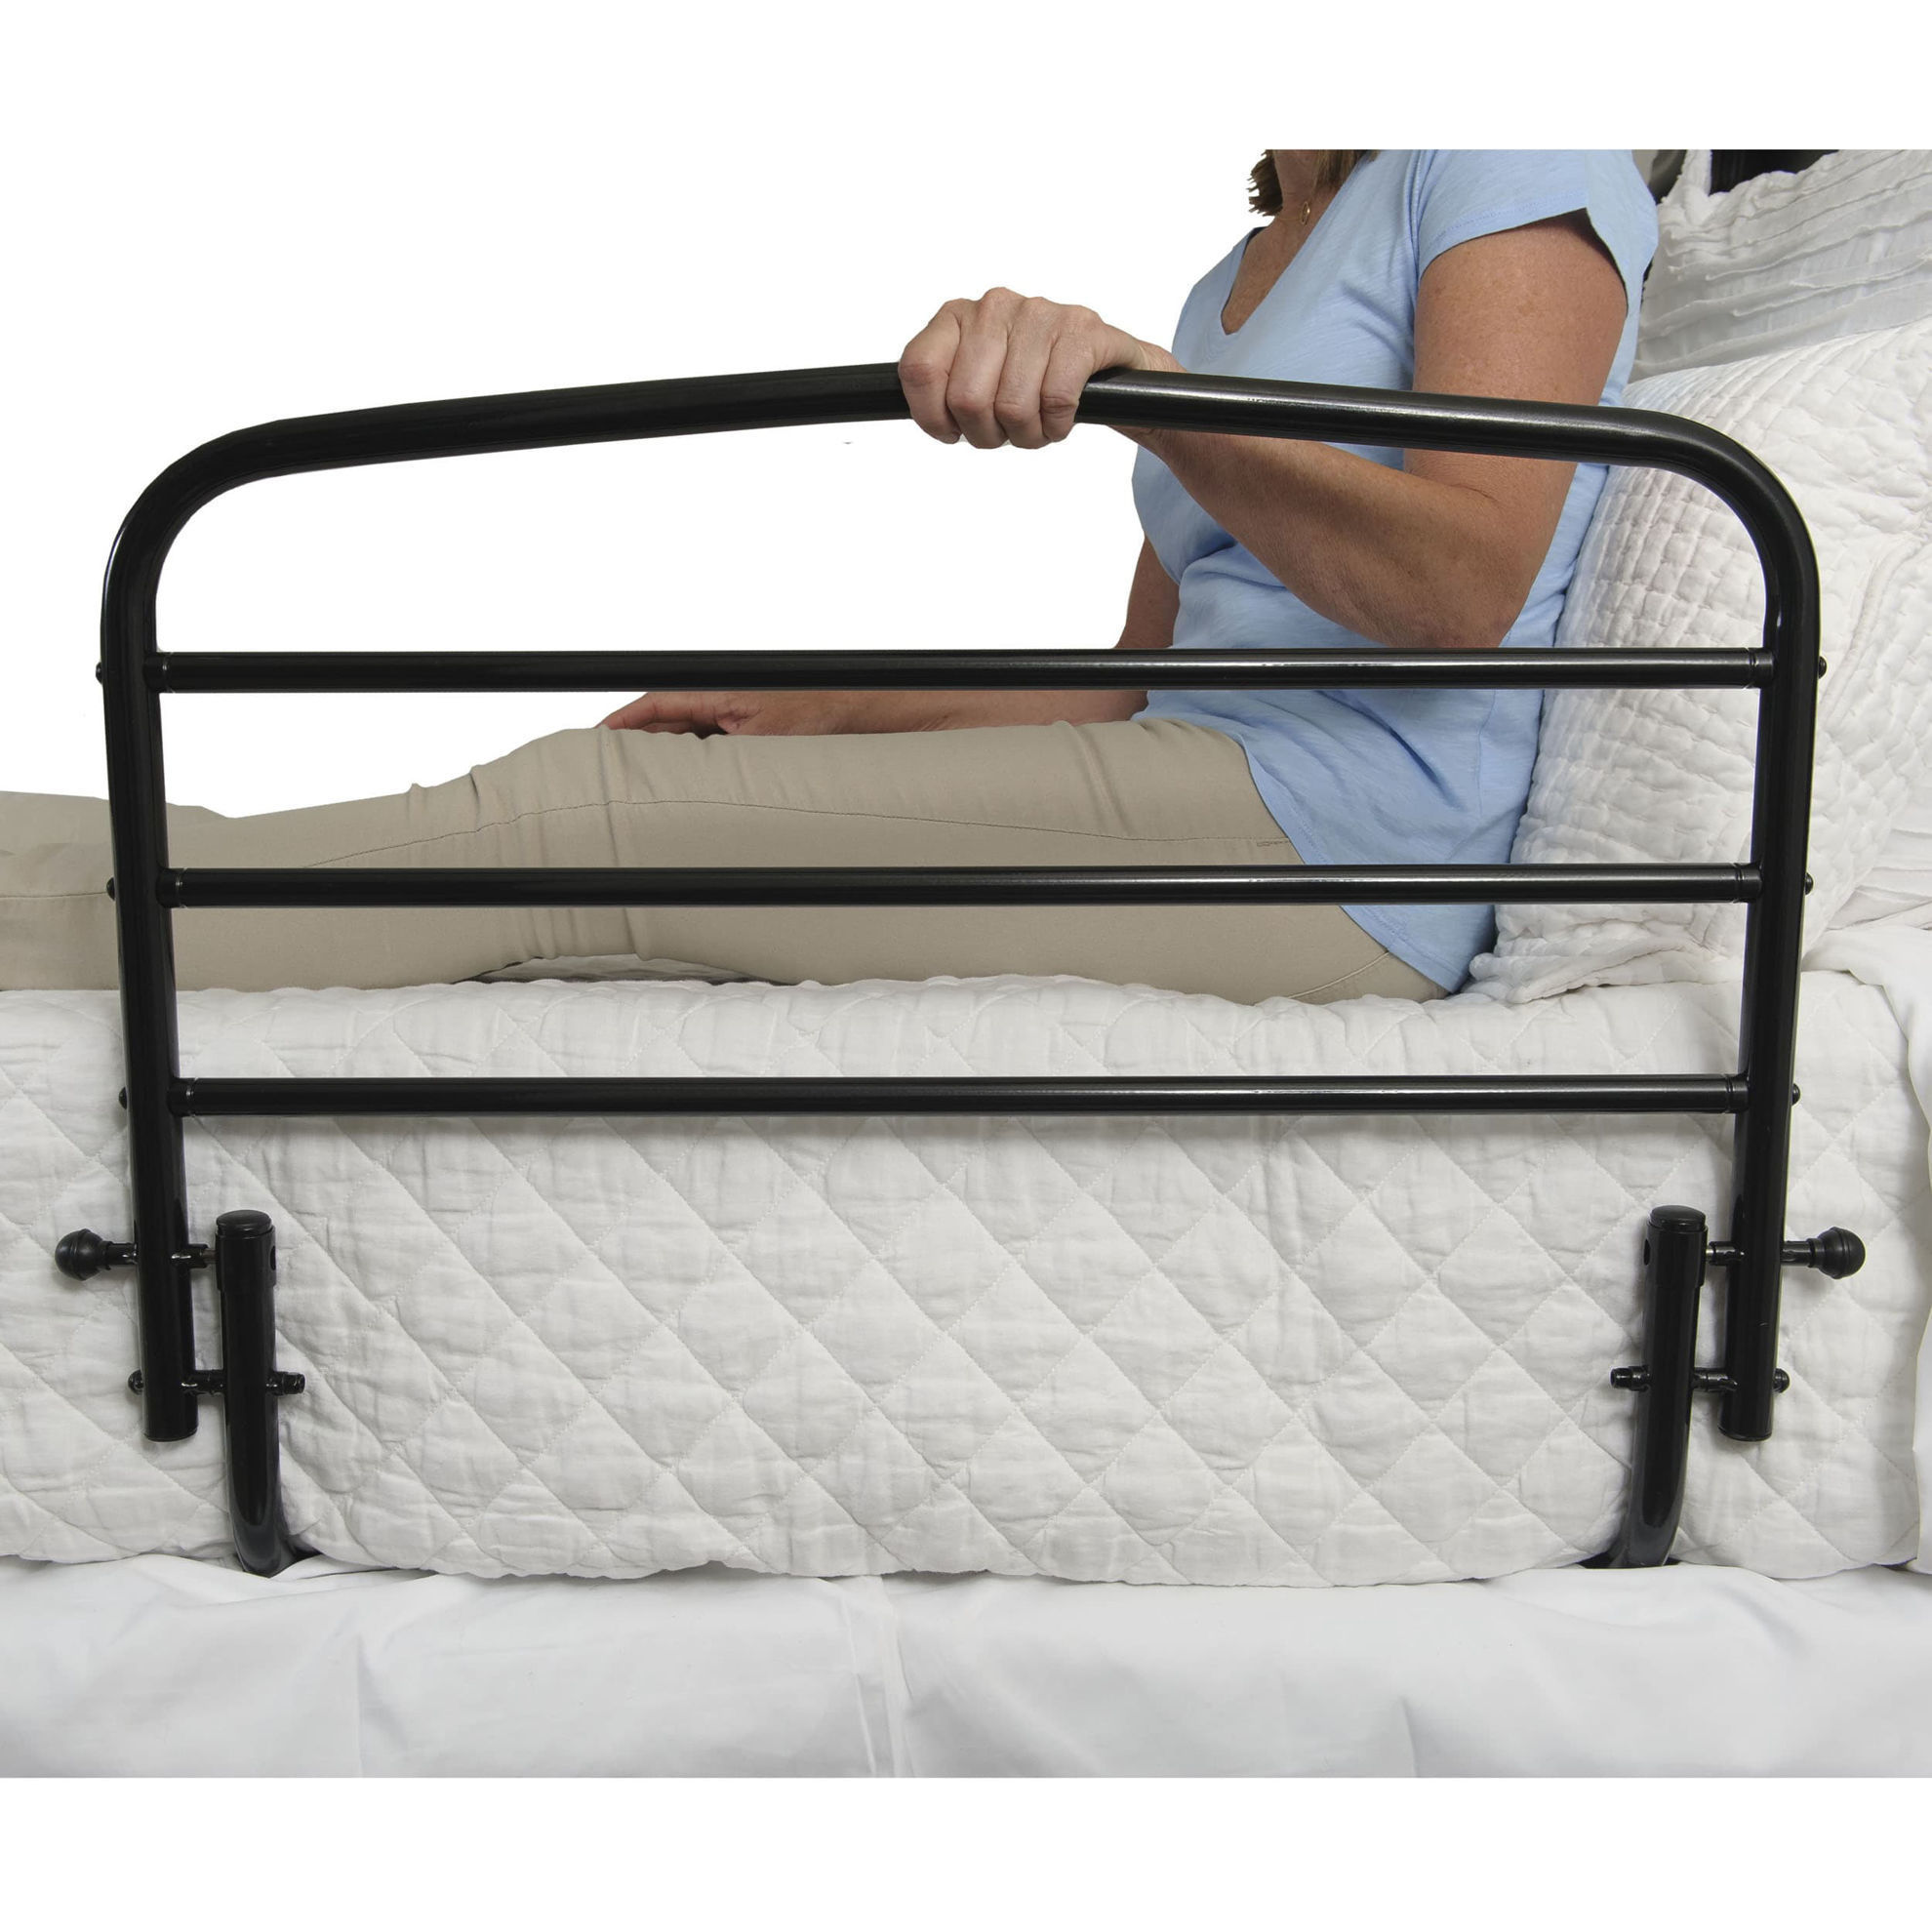 Stander 30 Safety Bed Rail Bp Mobility